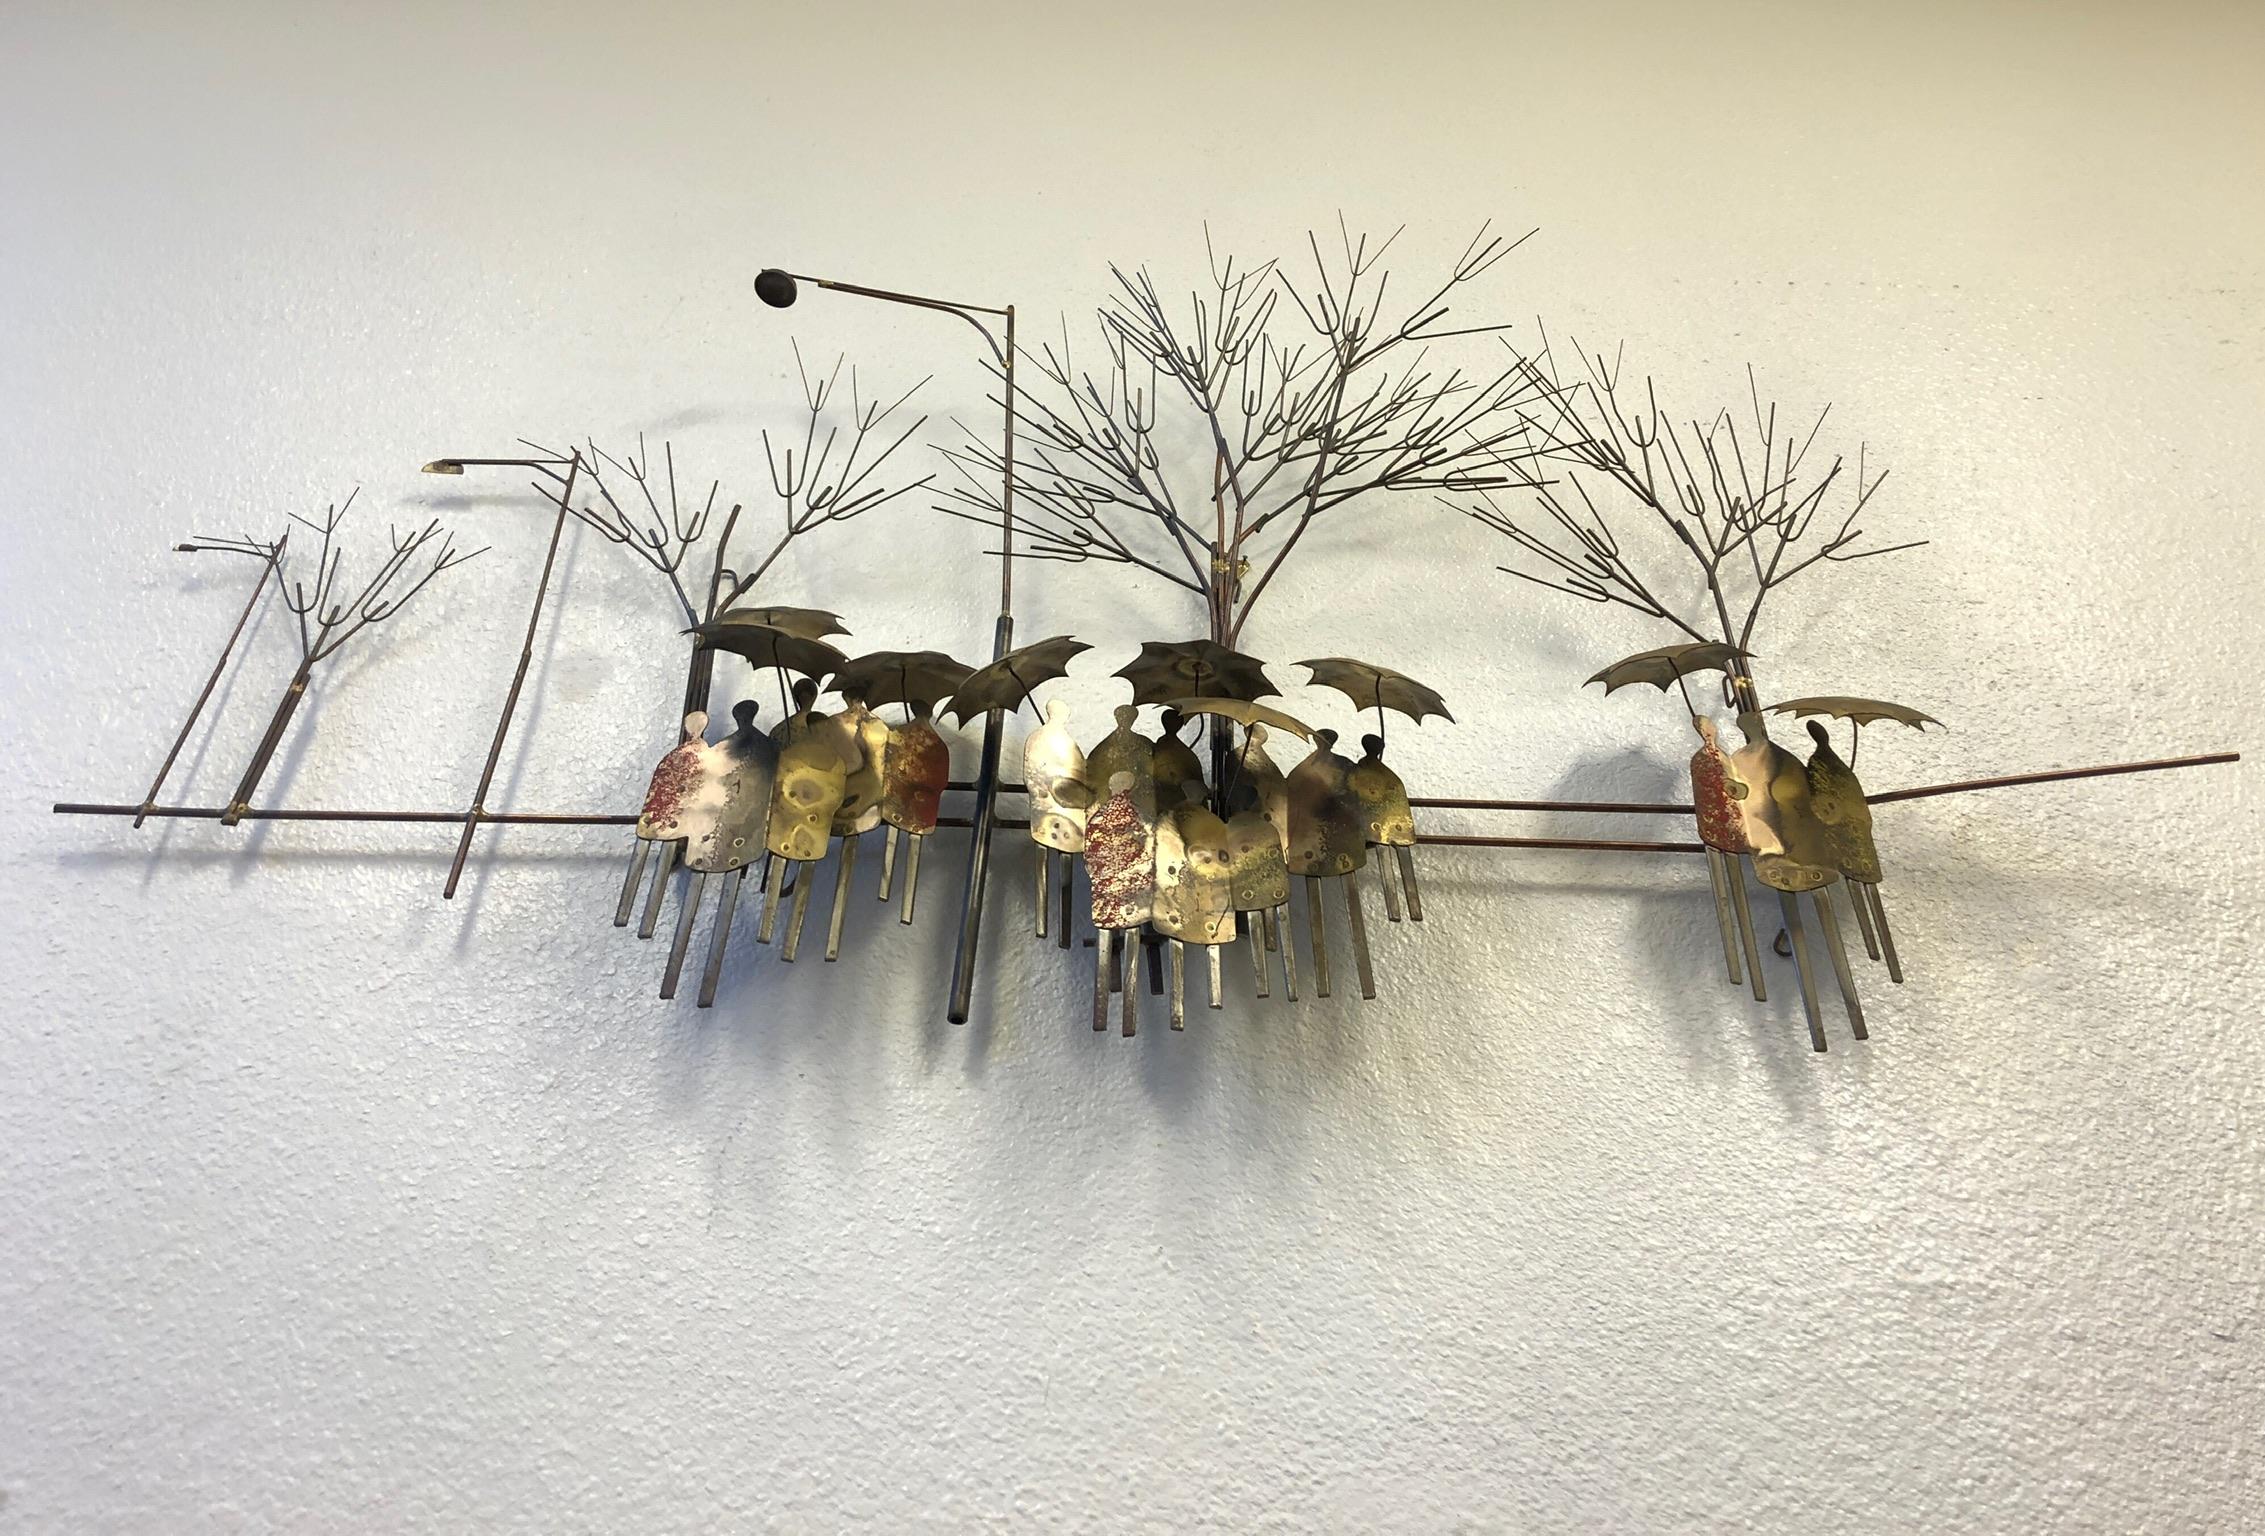 A beautiful 1970s wall sculpture depicting a rainy street scene by Curtis Jere. The sculpture is constructed of mix metals like brass, copper and steel. The sculpture is hand signed in the front and it has copper plate on the back.
Overall